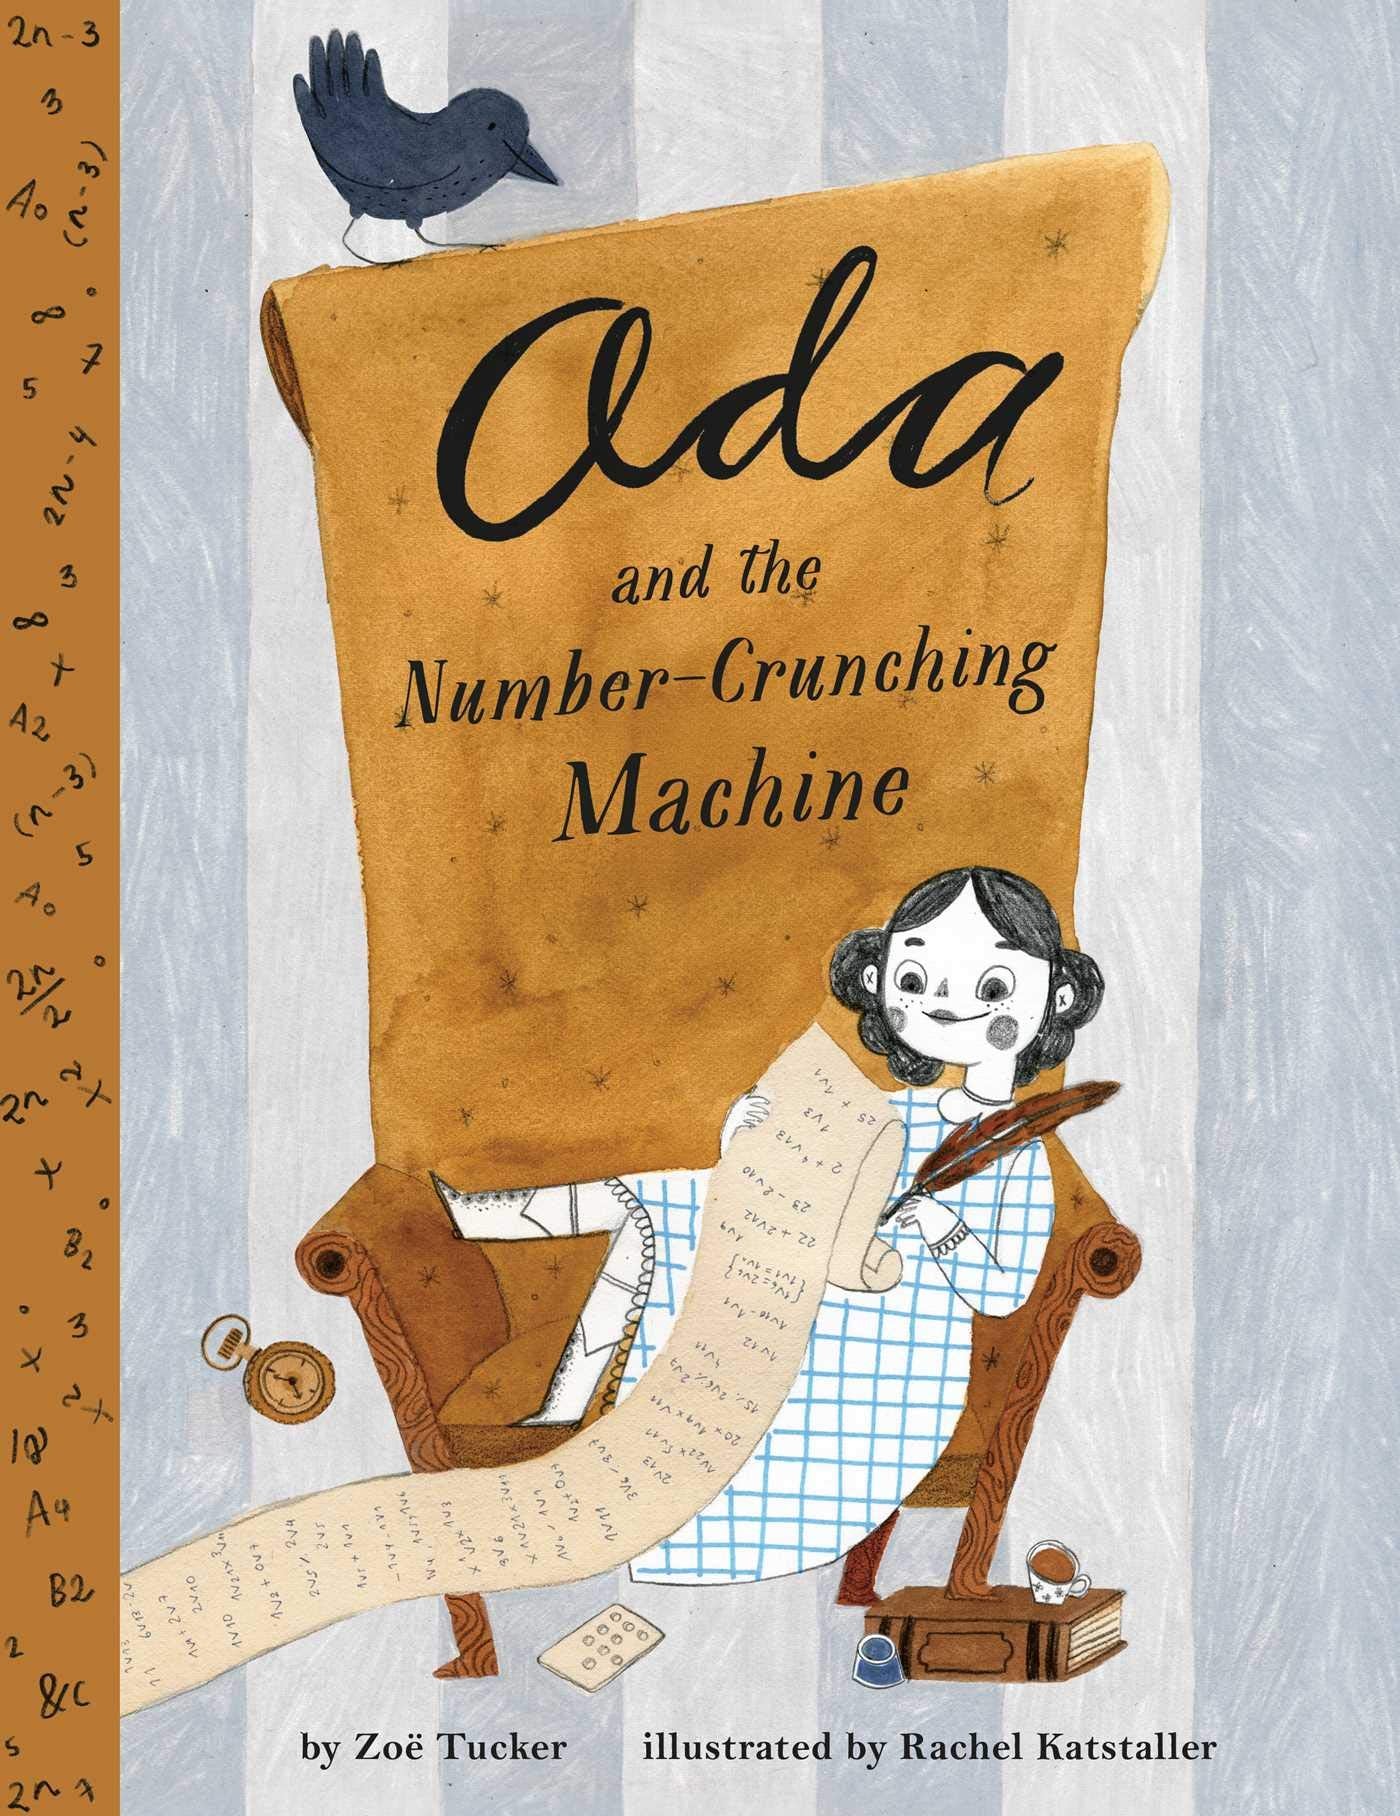 Ada Lovelace and the Number-Crunching Machine